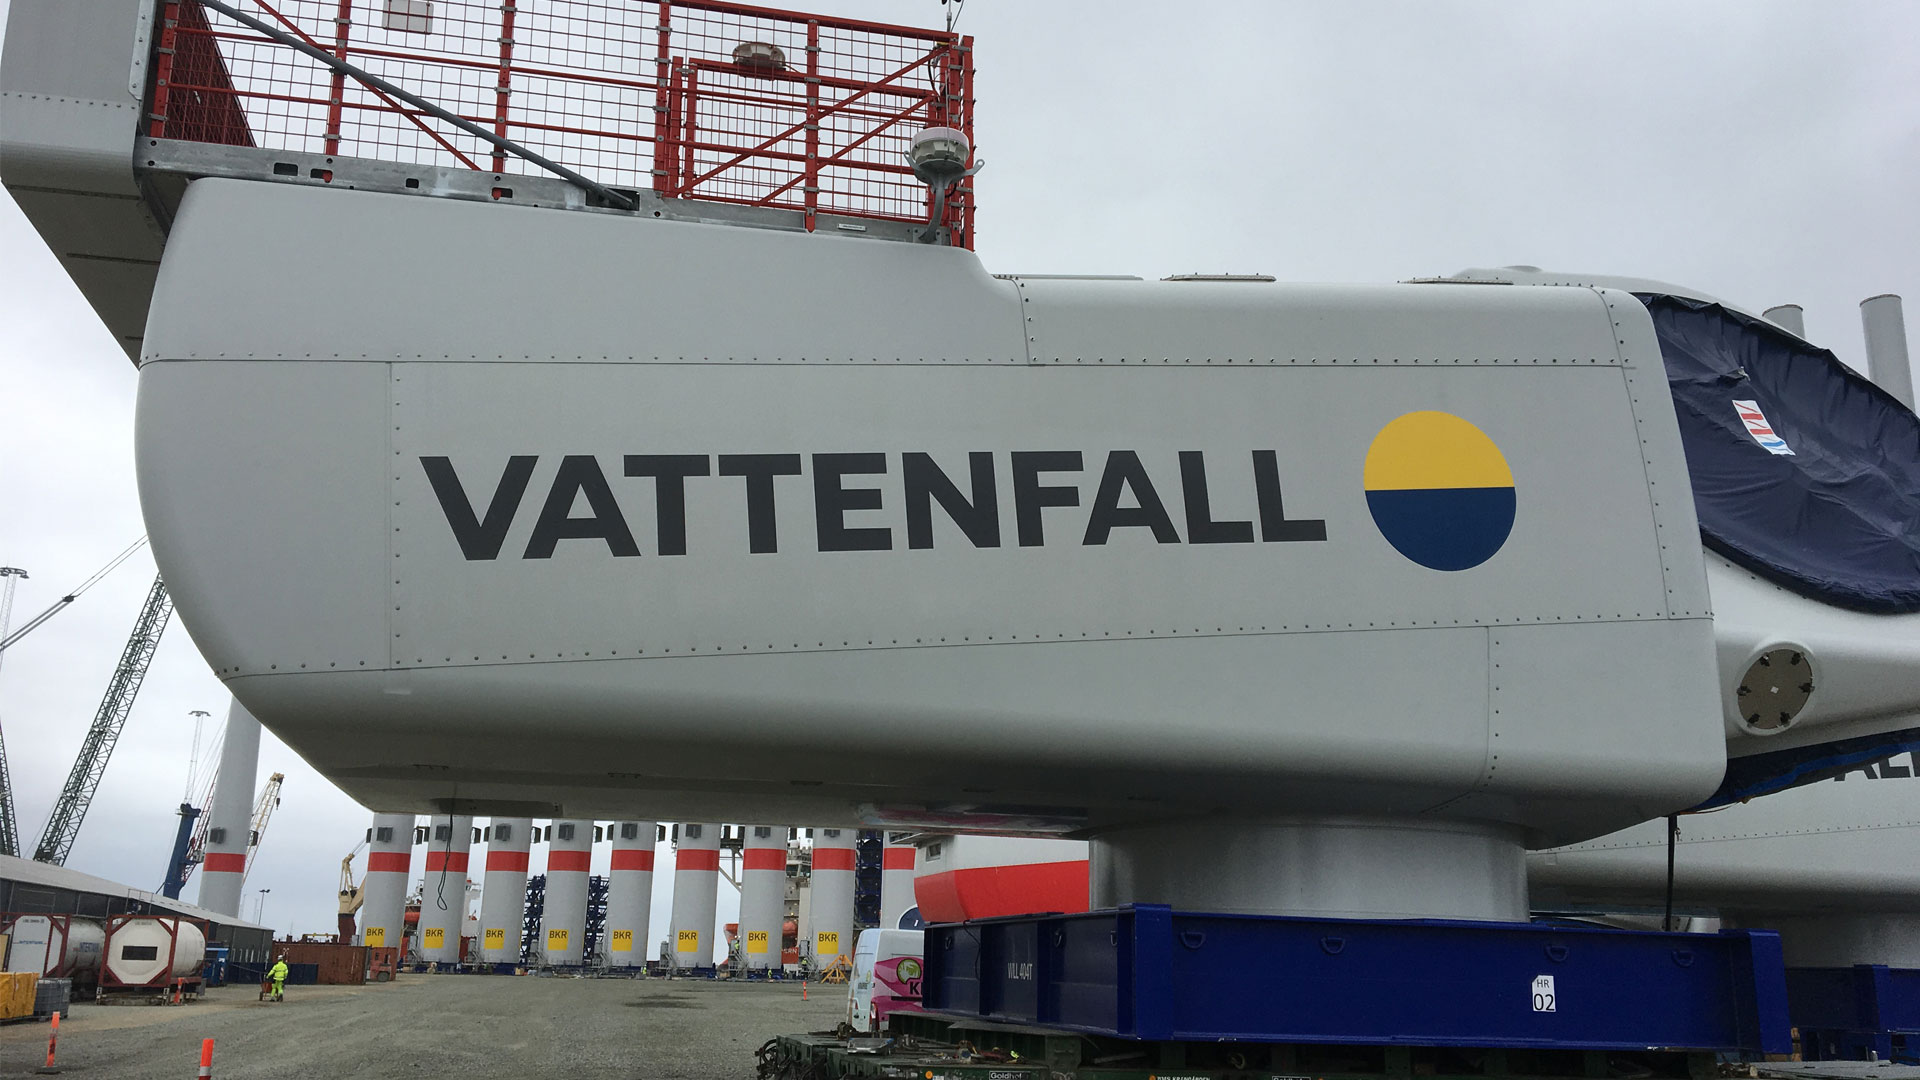 The first nacelle with Vattenfall’s new logo